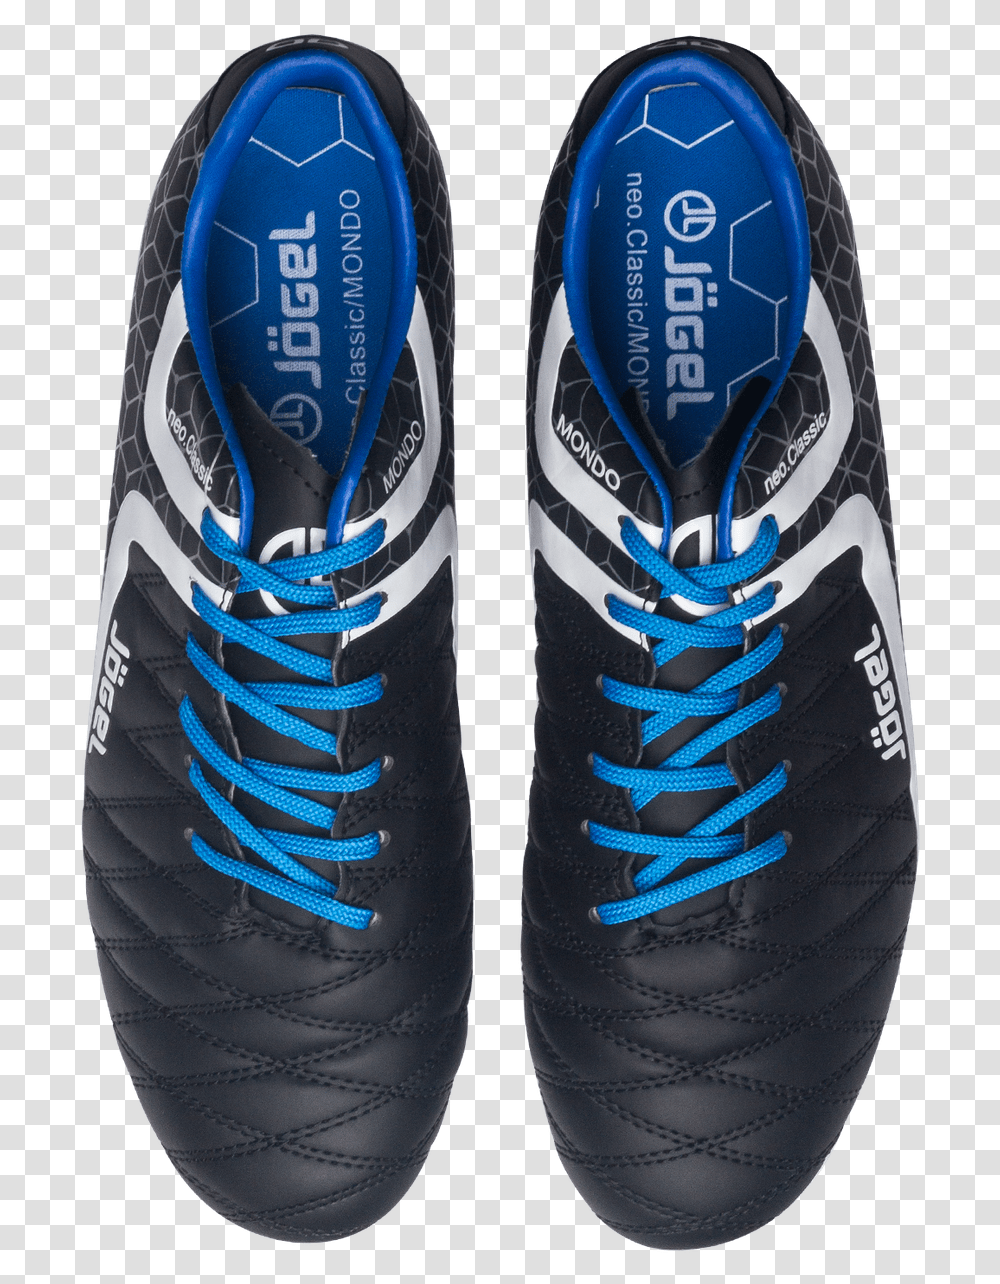 Football Boots Shoes Top View, Apparel, Footwear, Running Shoe Transparent Png